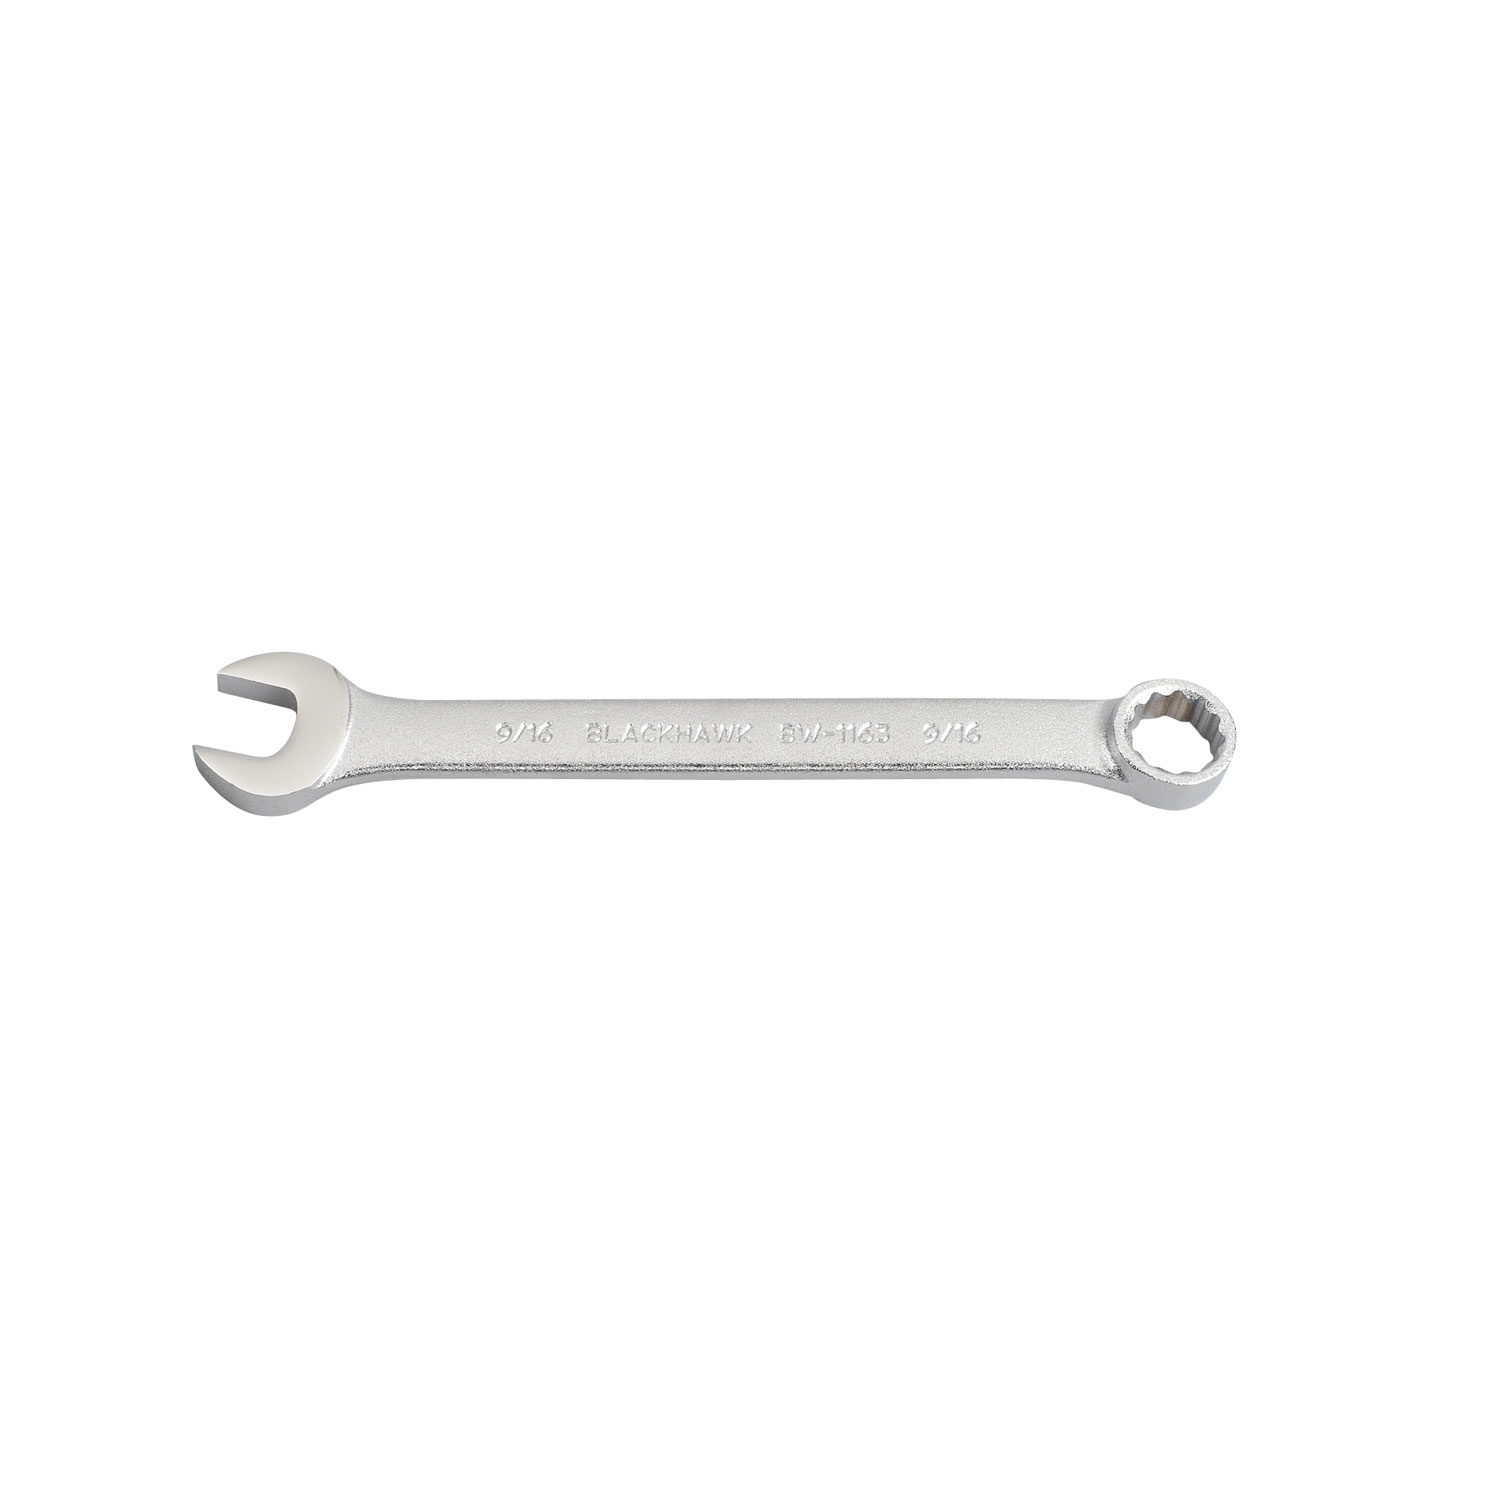 12-Point Fractional Combination Wrench, 9/16, Matte Finish